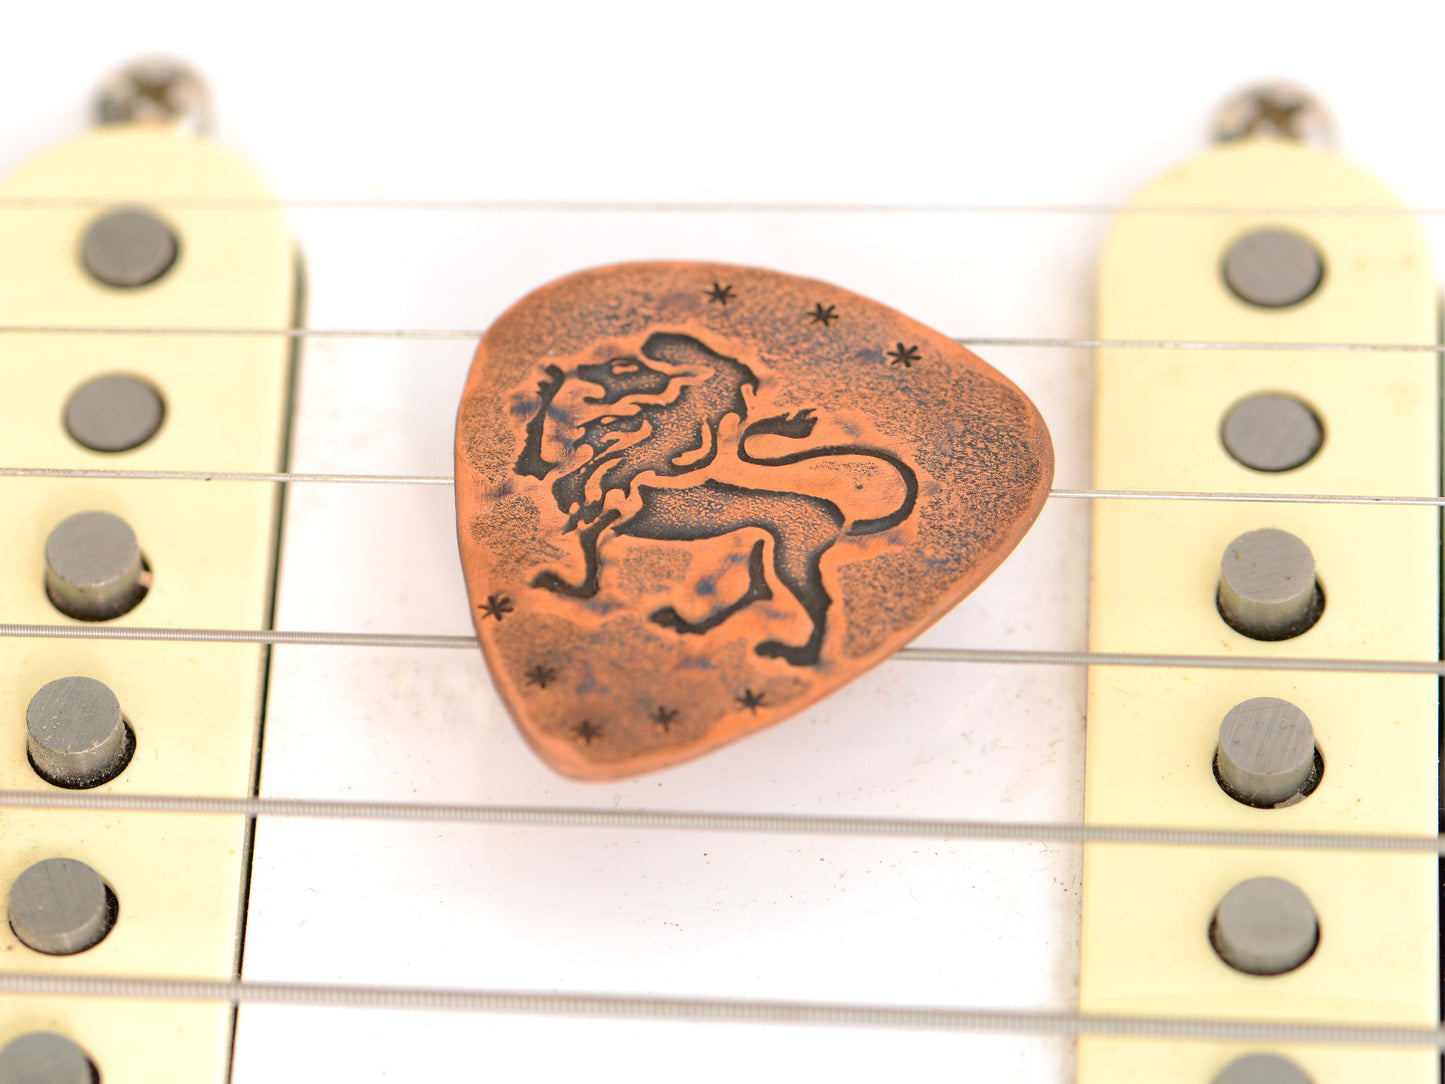 Lion on Guitar Pick in copper for extra roar